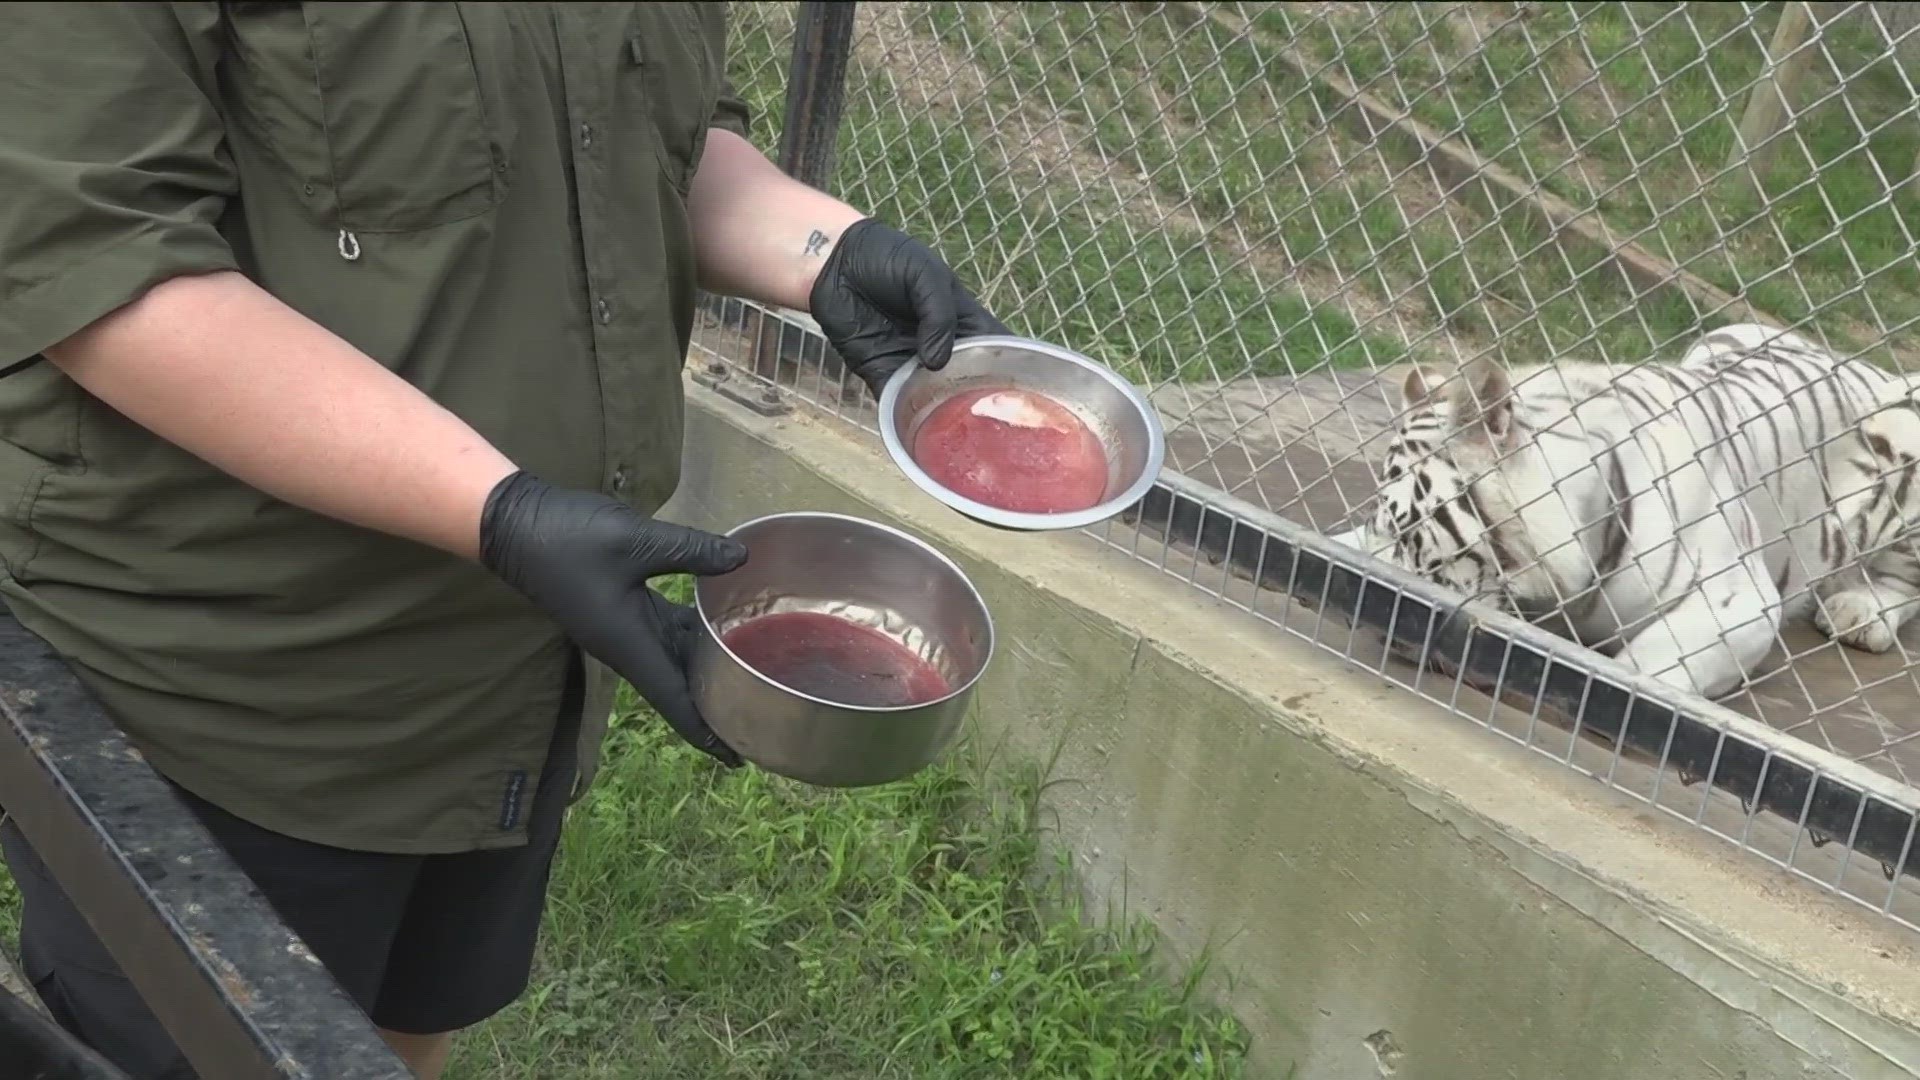 Triple-digit temperatures can be hard on humans and animals. KVUE's Eric Pointer checked in with the Austin Zoo to see how it handles the heat.